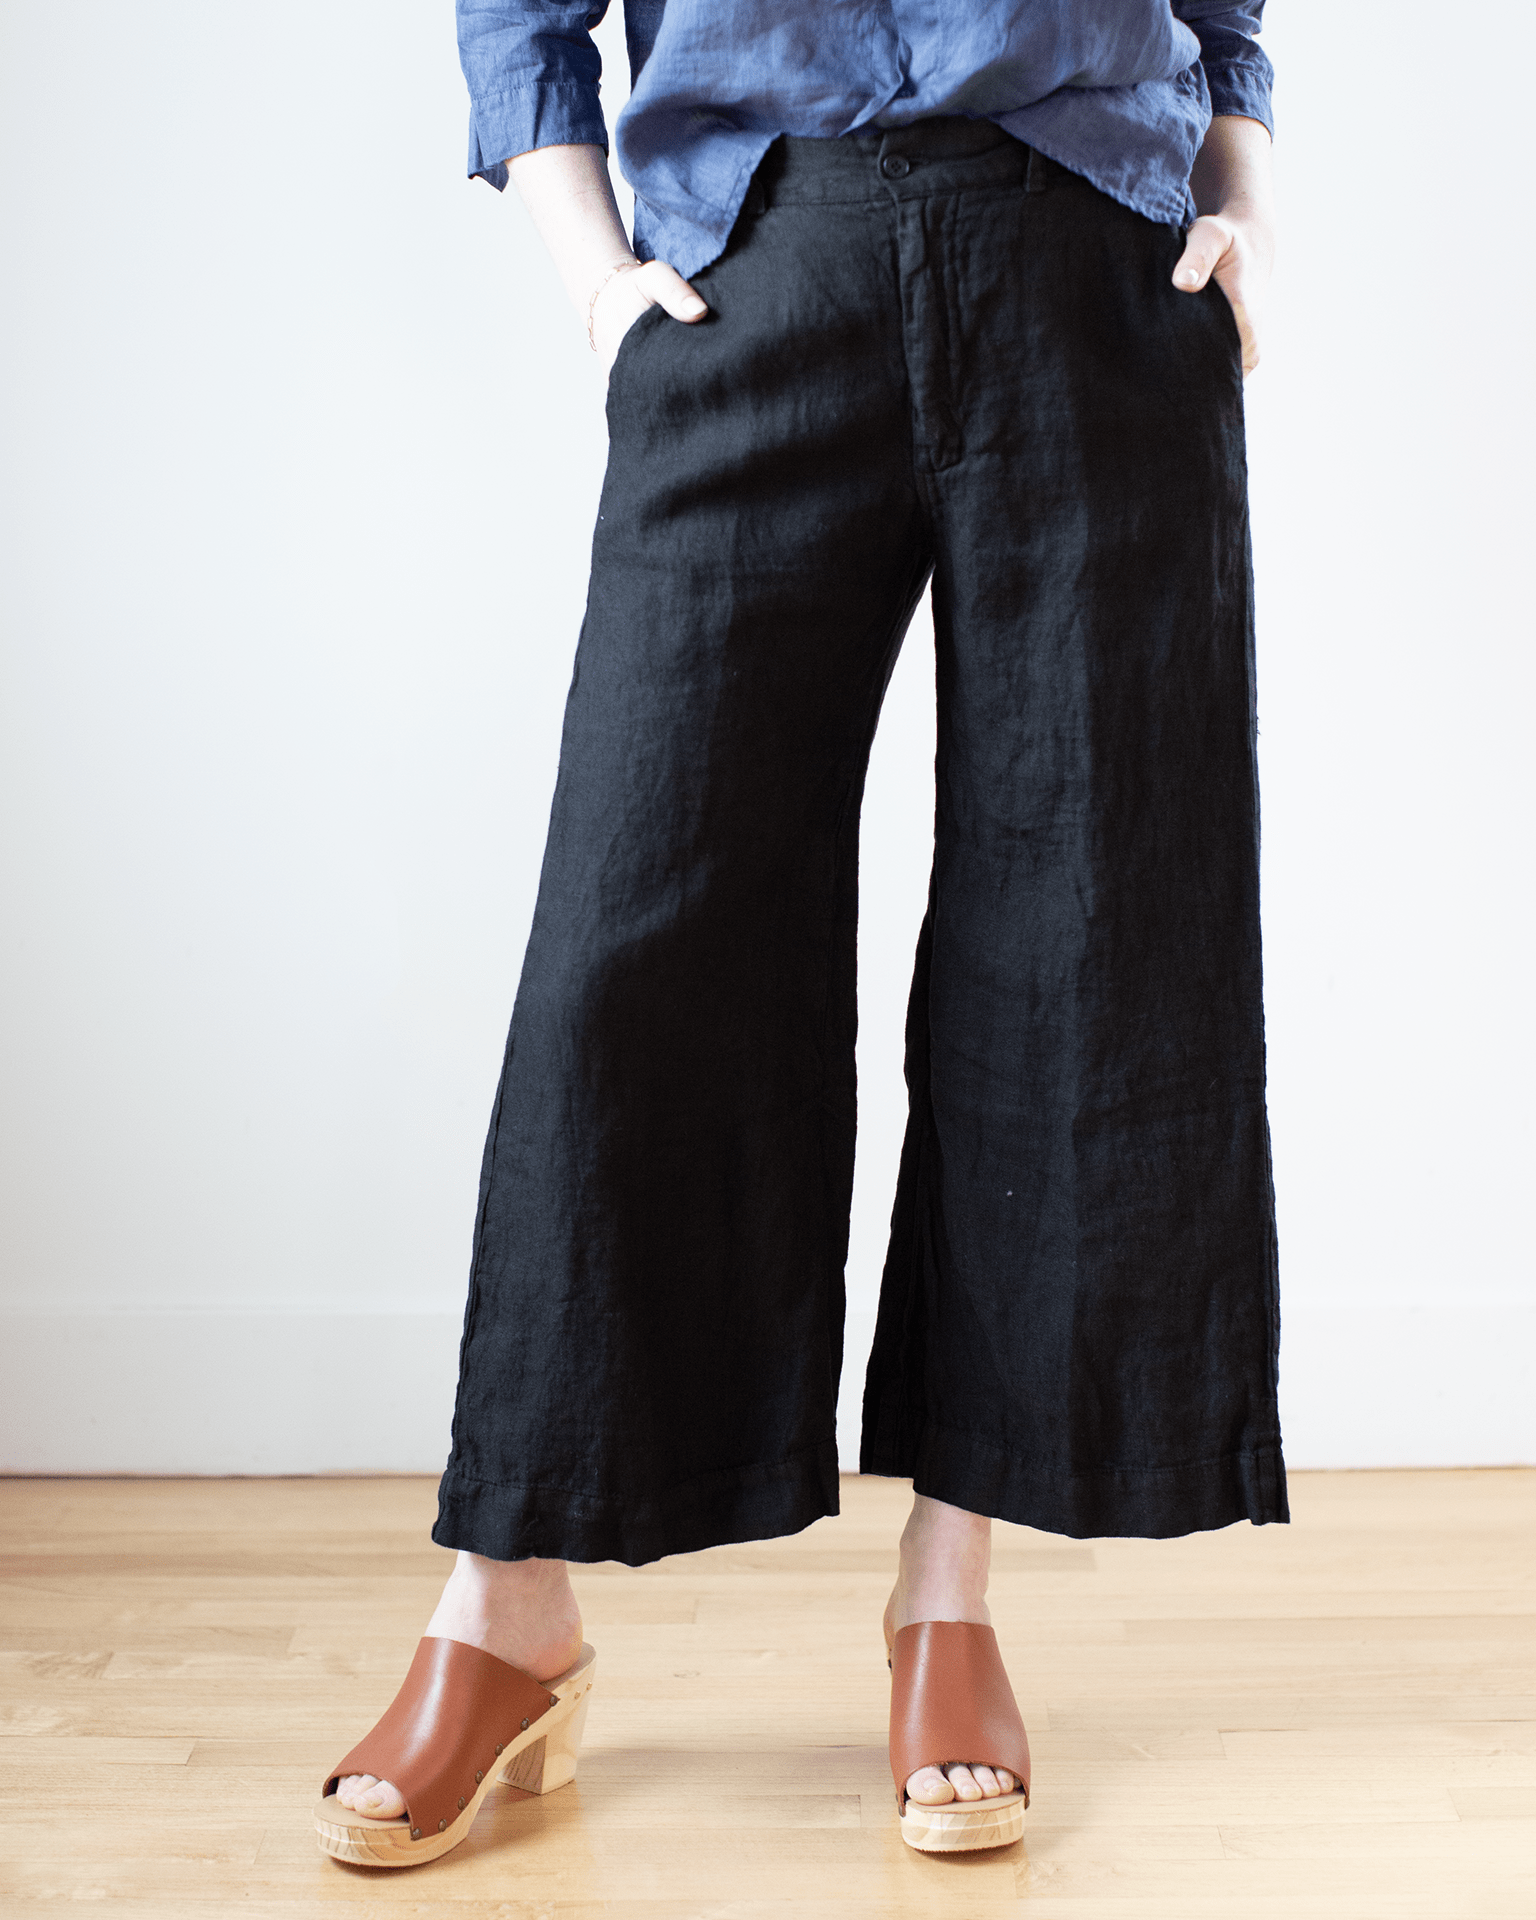 Cropped Polly Pant in Black HW Linen Twill